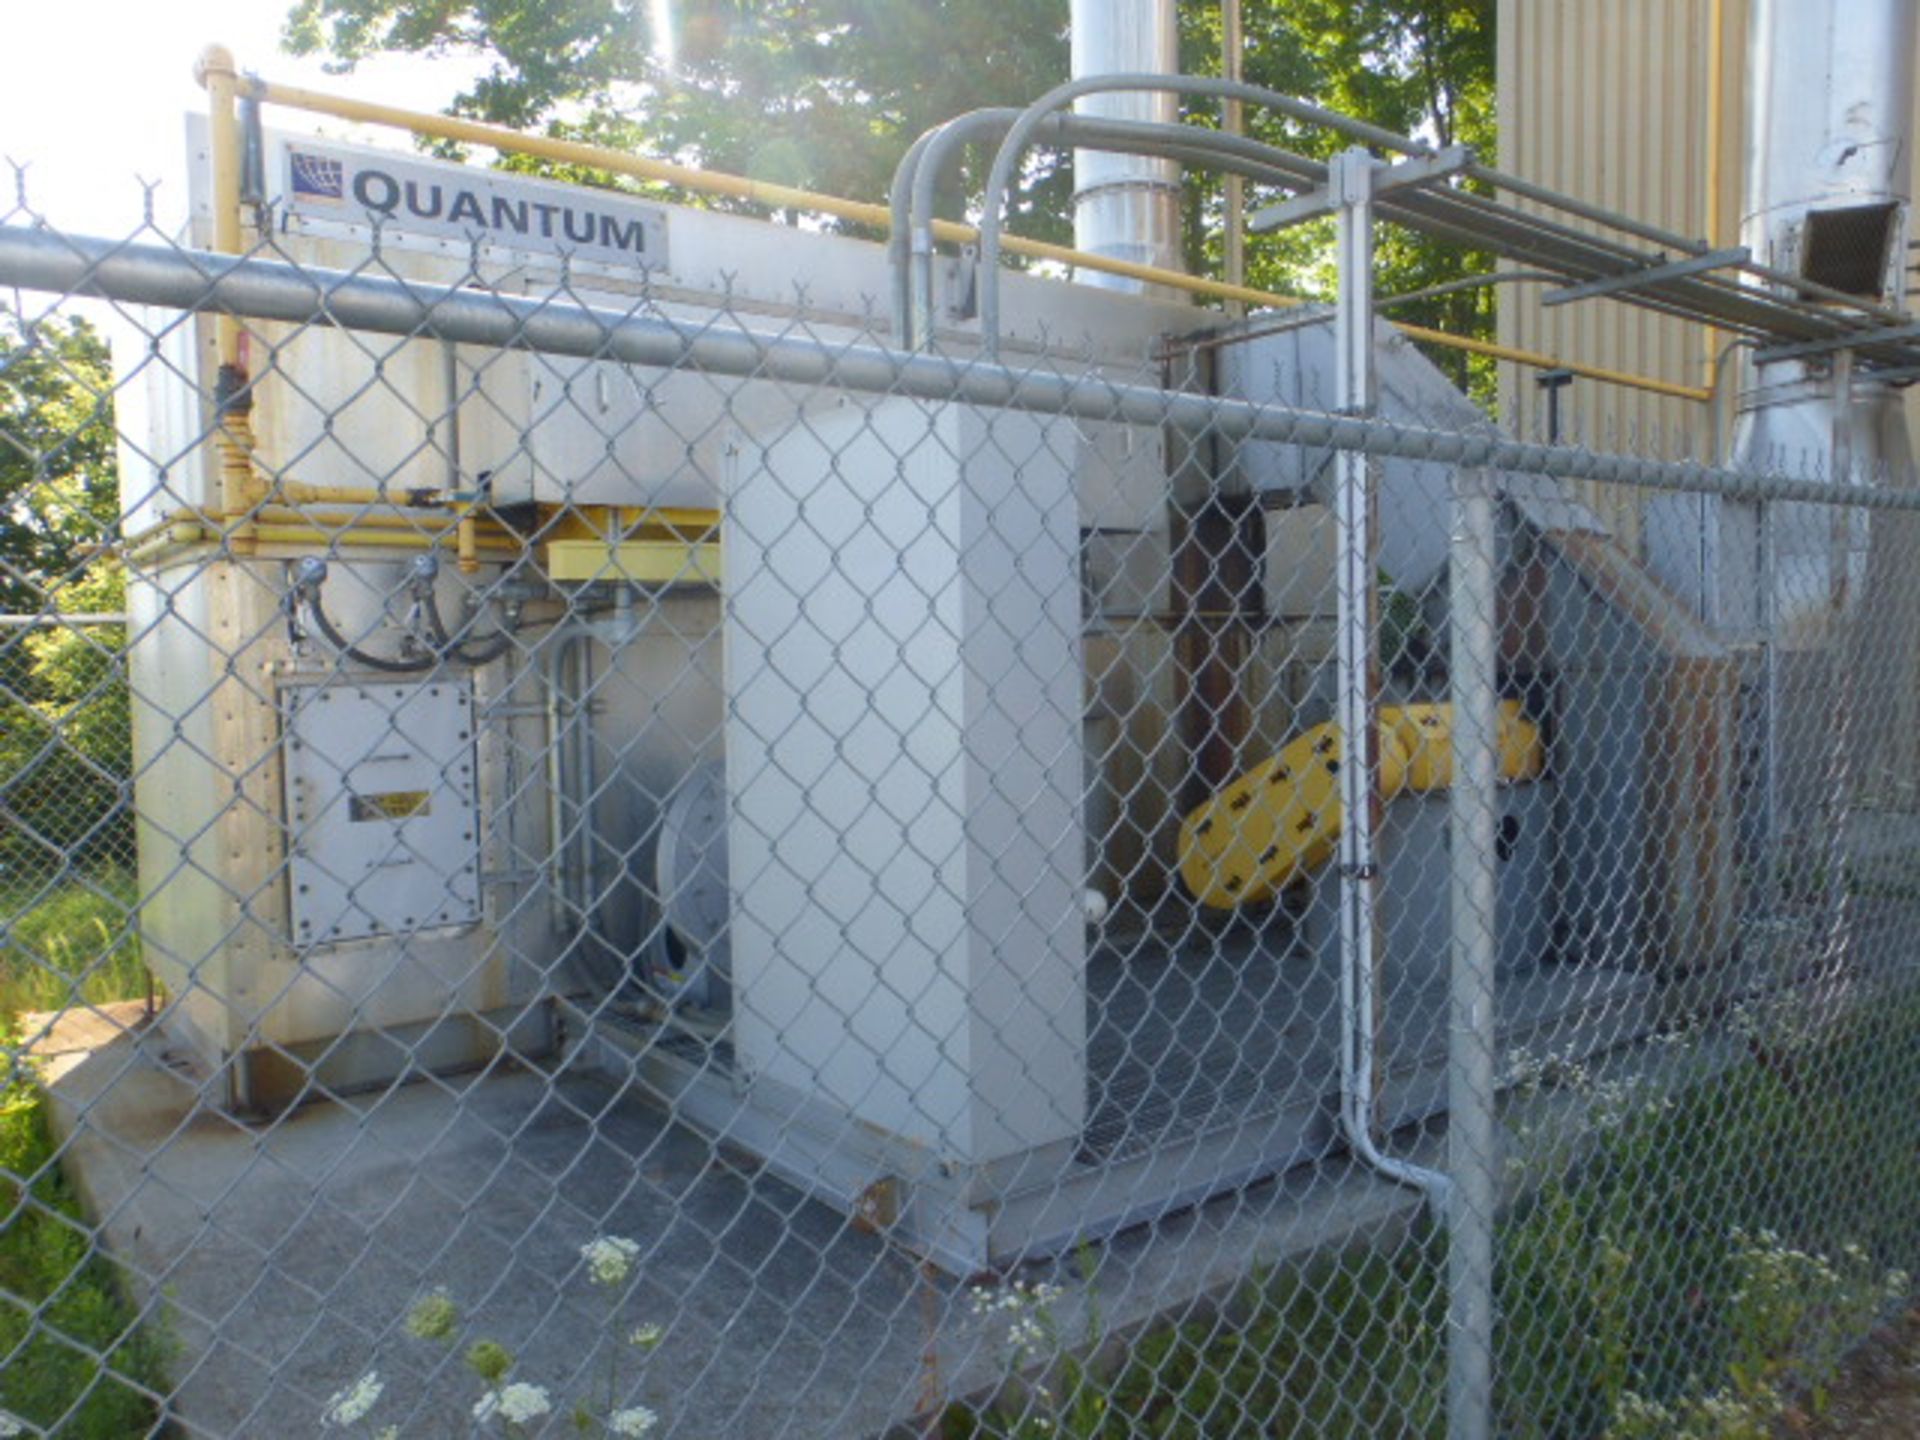 MEG TEC QUANTUM 4000 SCFM CATALYTIC OXIDIZER SYSTEM W/INSULTATED SYSTEM FAN, COMBUSTION BLOWER, - Image 3 of 4